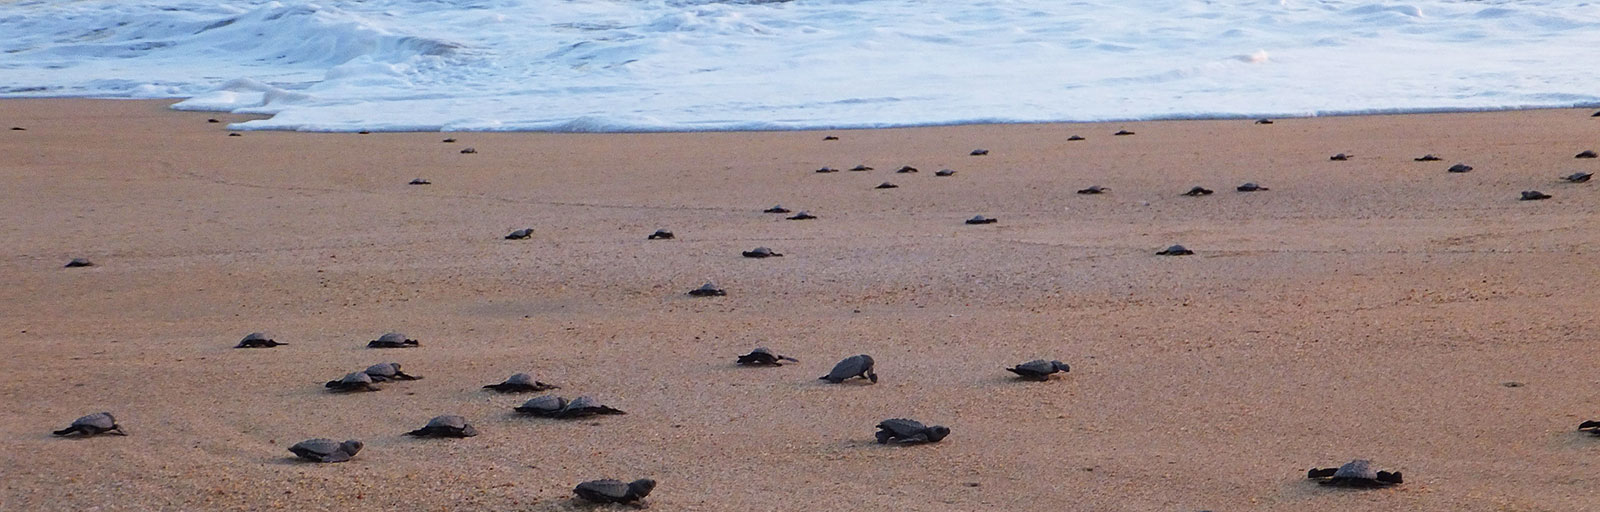 Sea Turtle Release & Mexico Yoga Retreat: Baby Turtles Scrable toward the Water